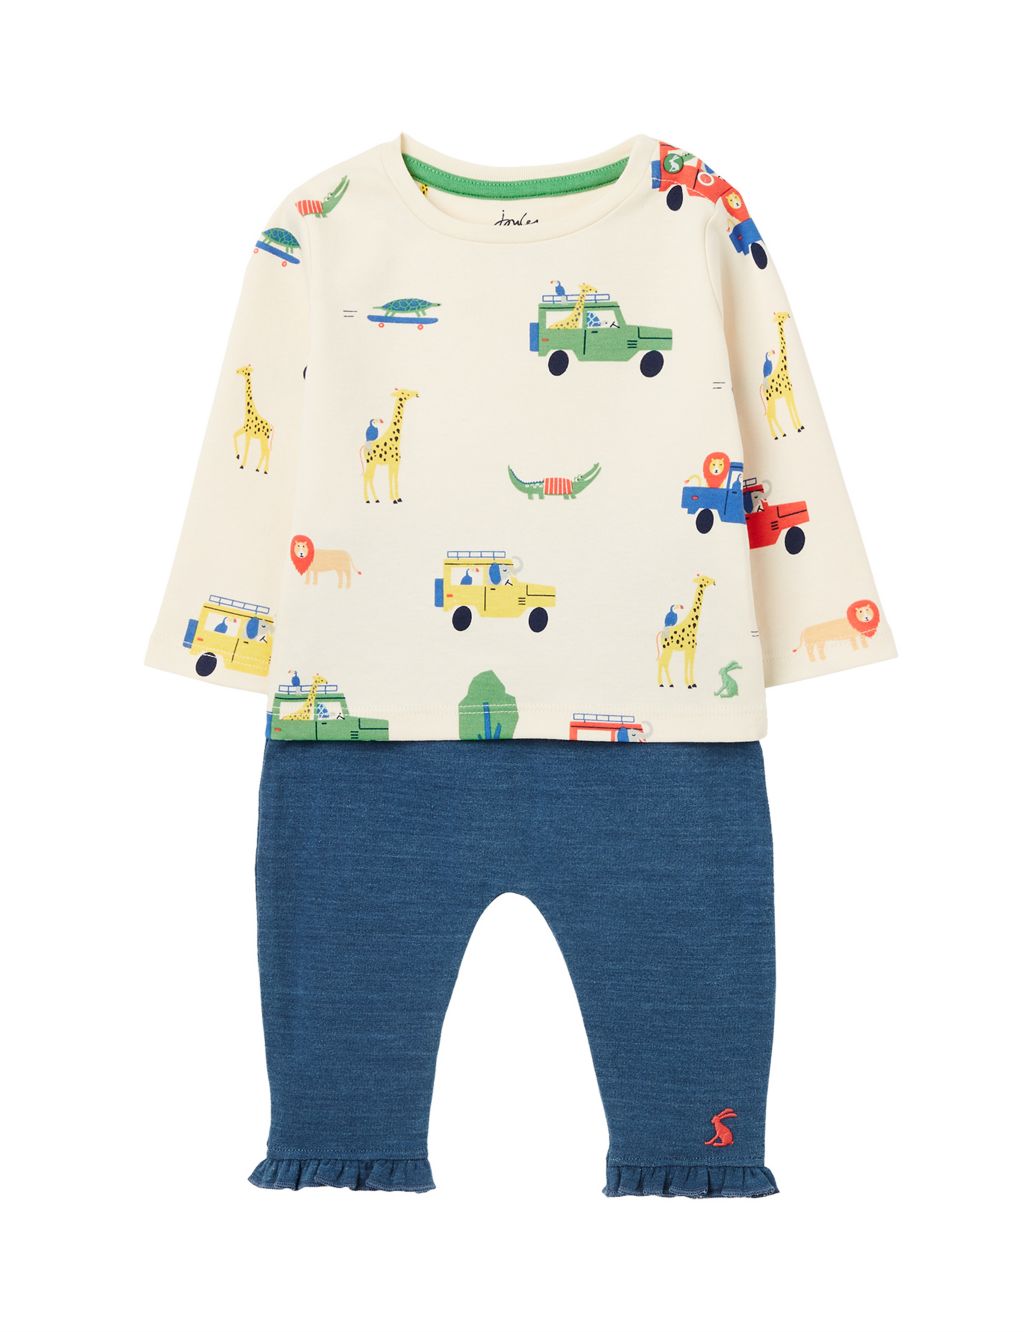 Cotton Rich Printed Outfit (0-3 Yrs) image 1